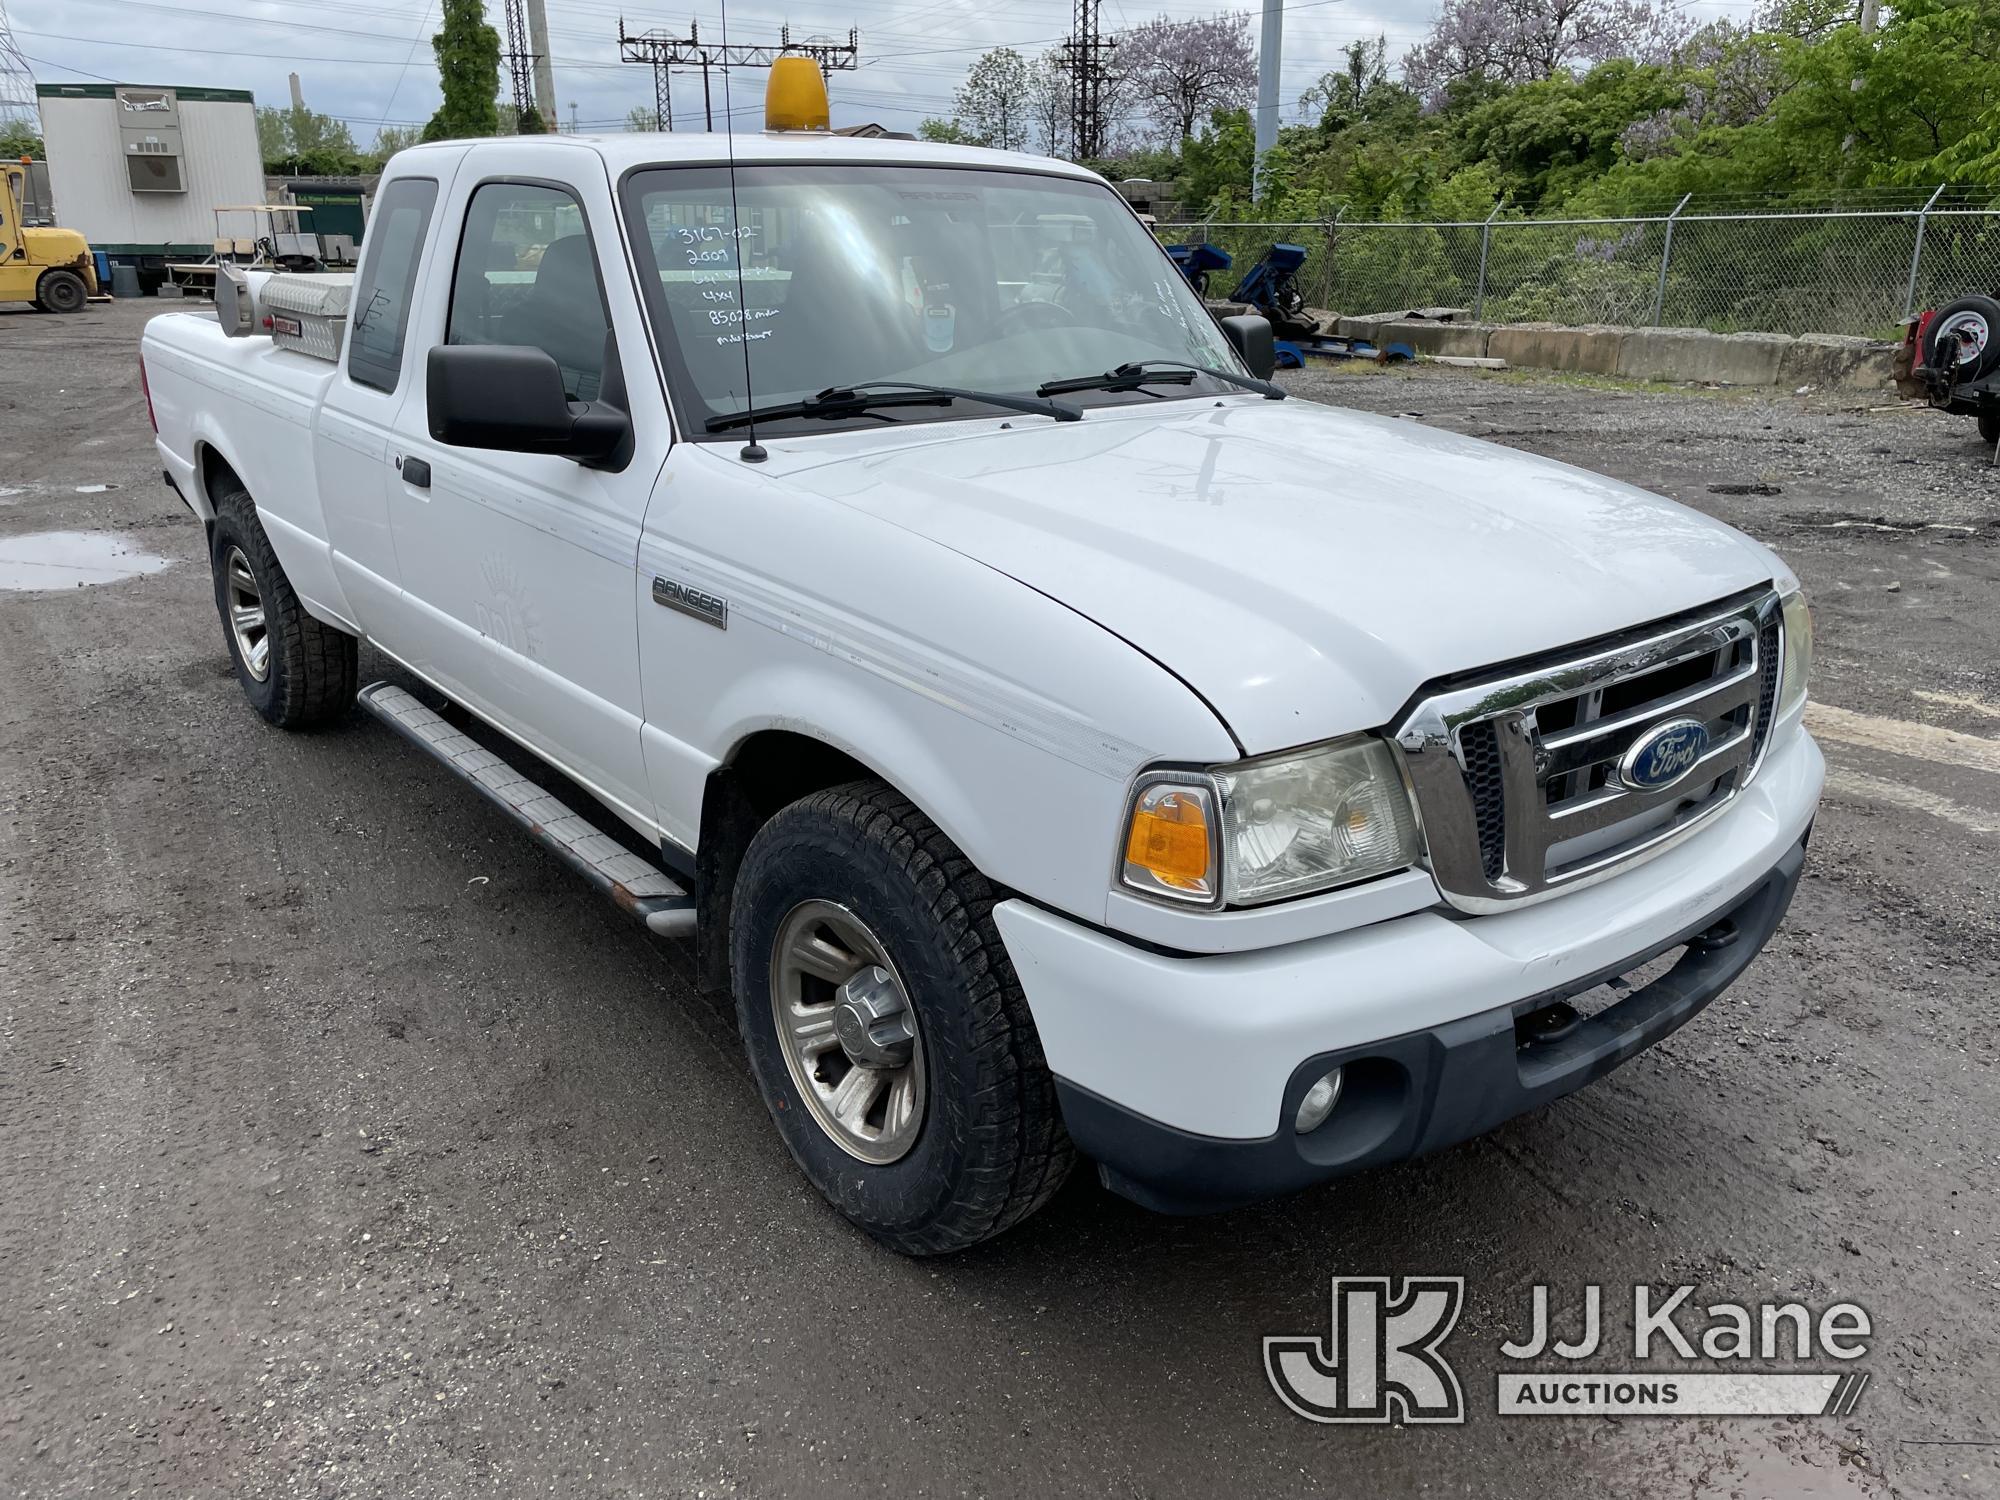 (Plymouth Meeting, PA) 2009 Ford Ranger 4x4 Extended-Cab Pickup Truck Runs & Moves, Body & Rust Dama